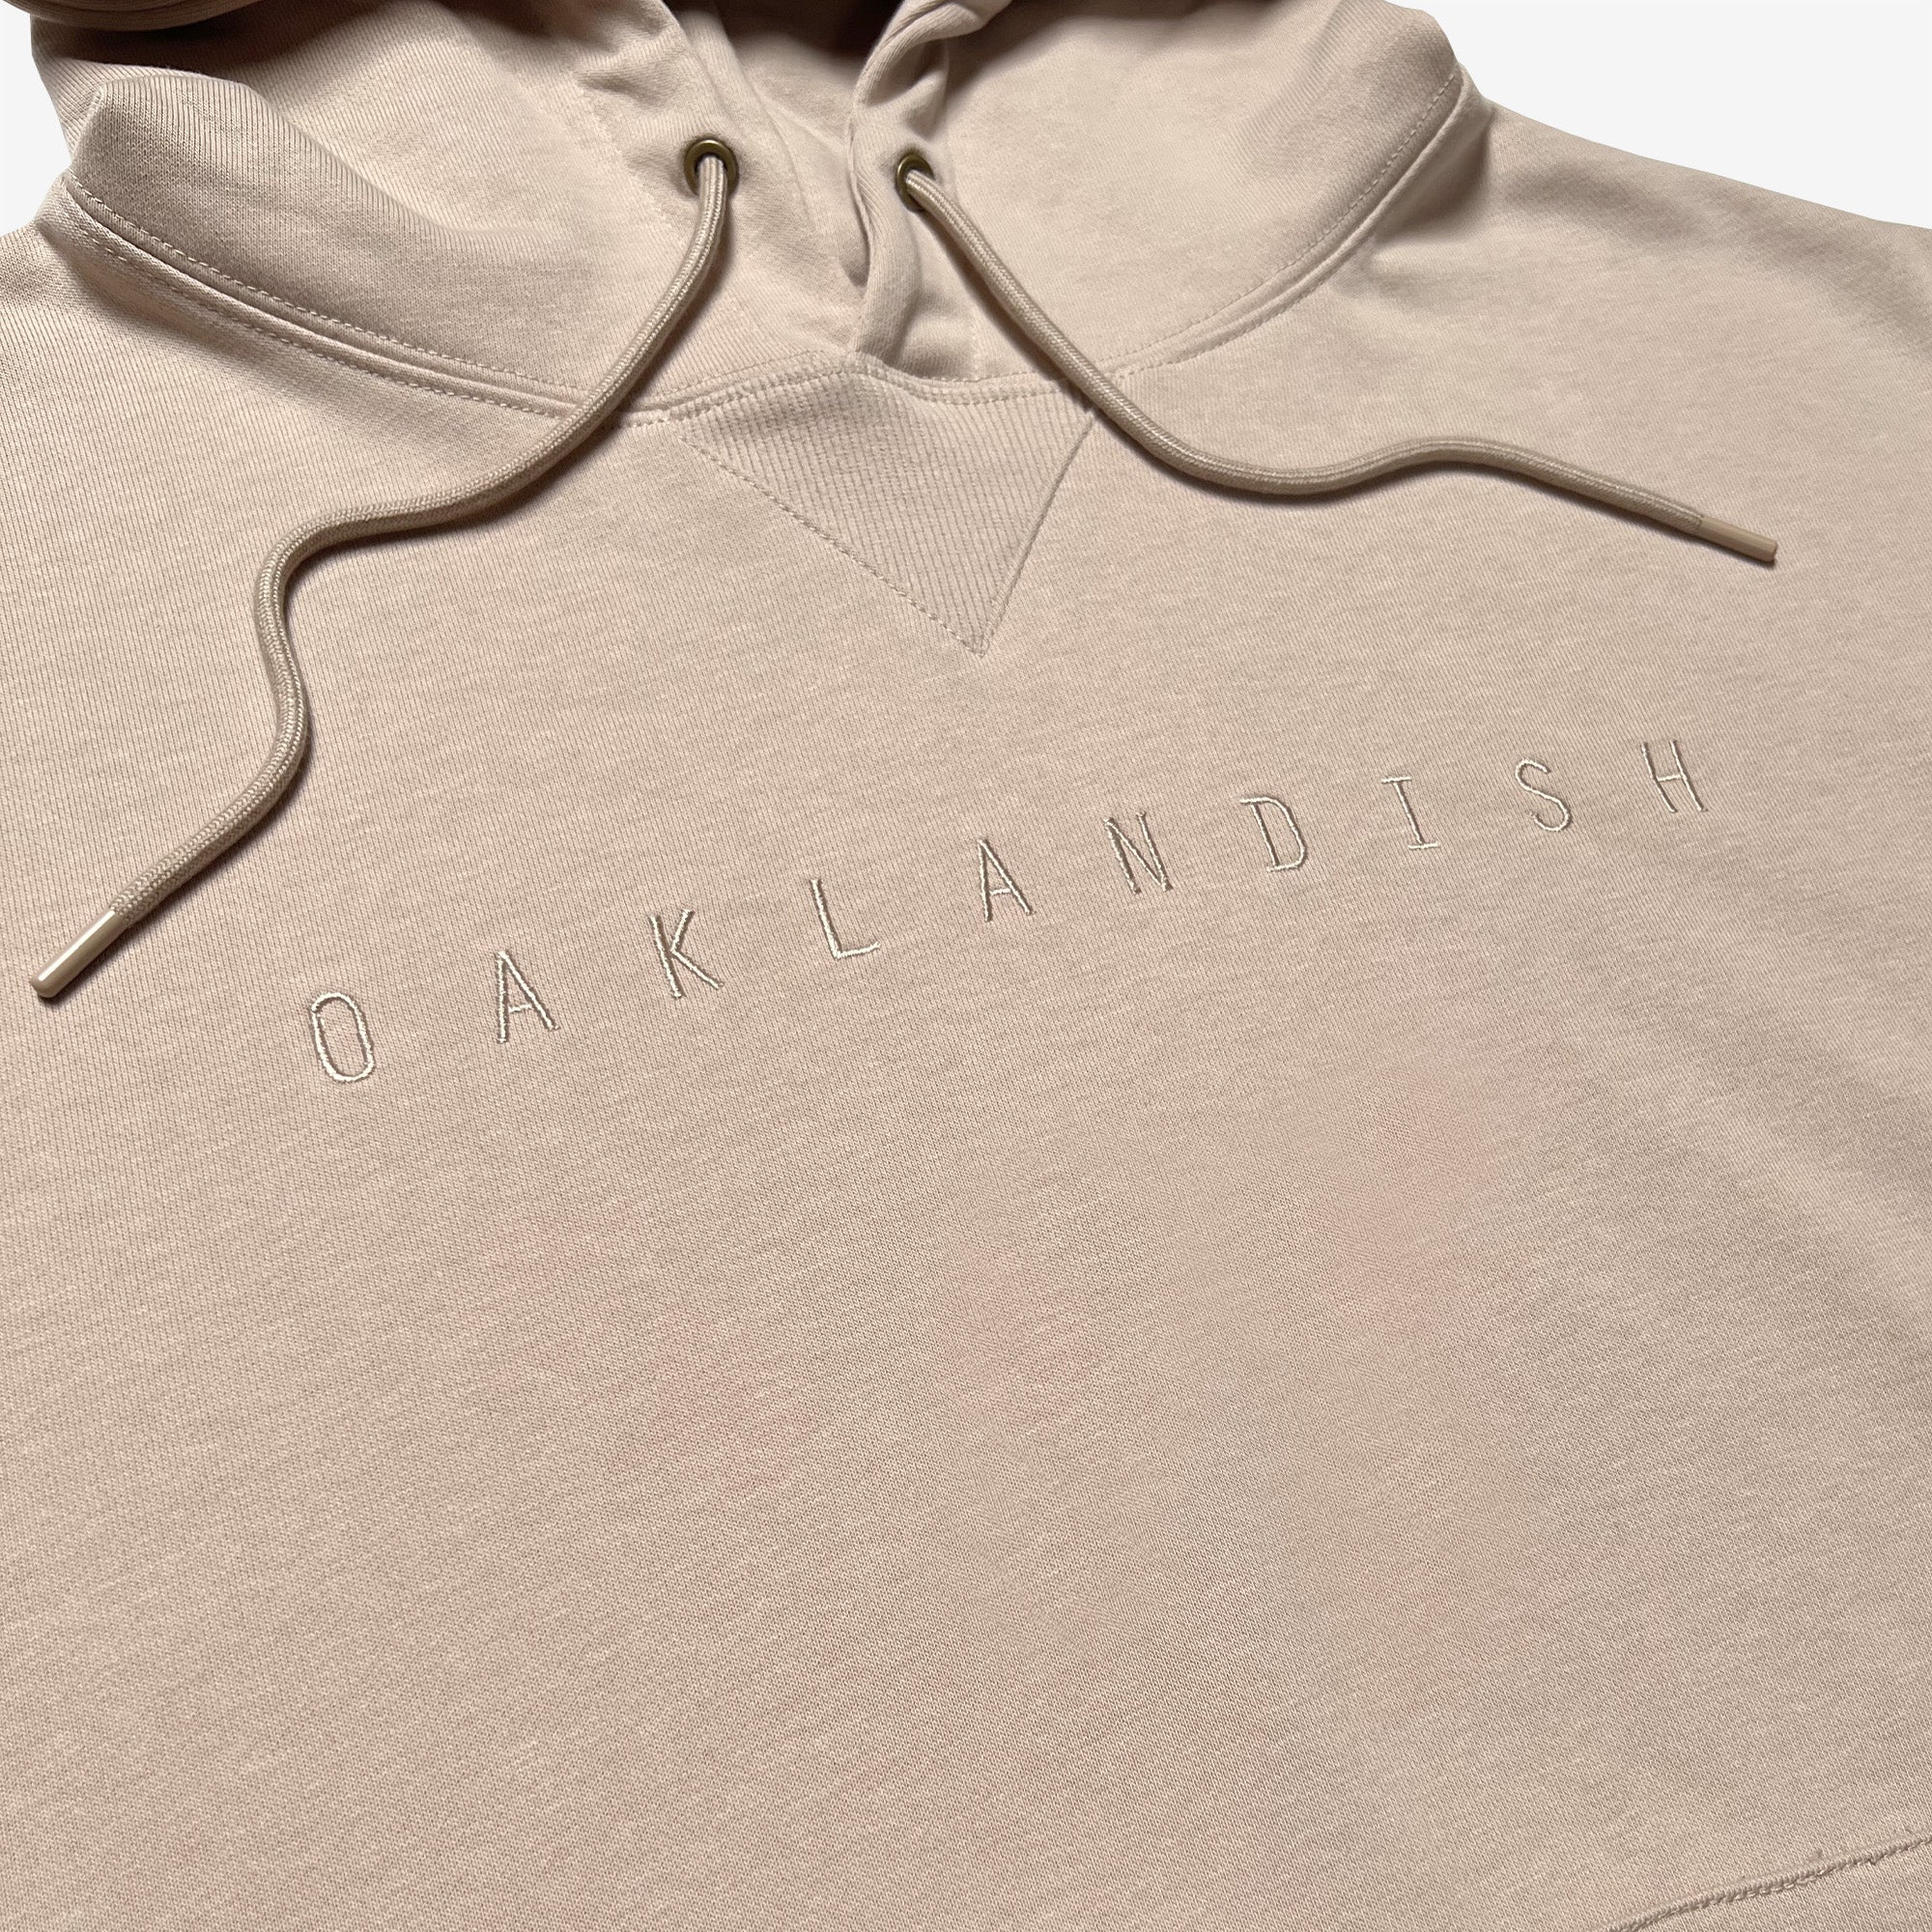 Detailed close-up of embroidered Oaklandish wordmark on a sand-colored hoodie.